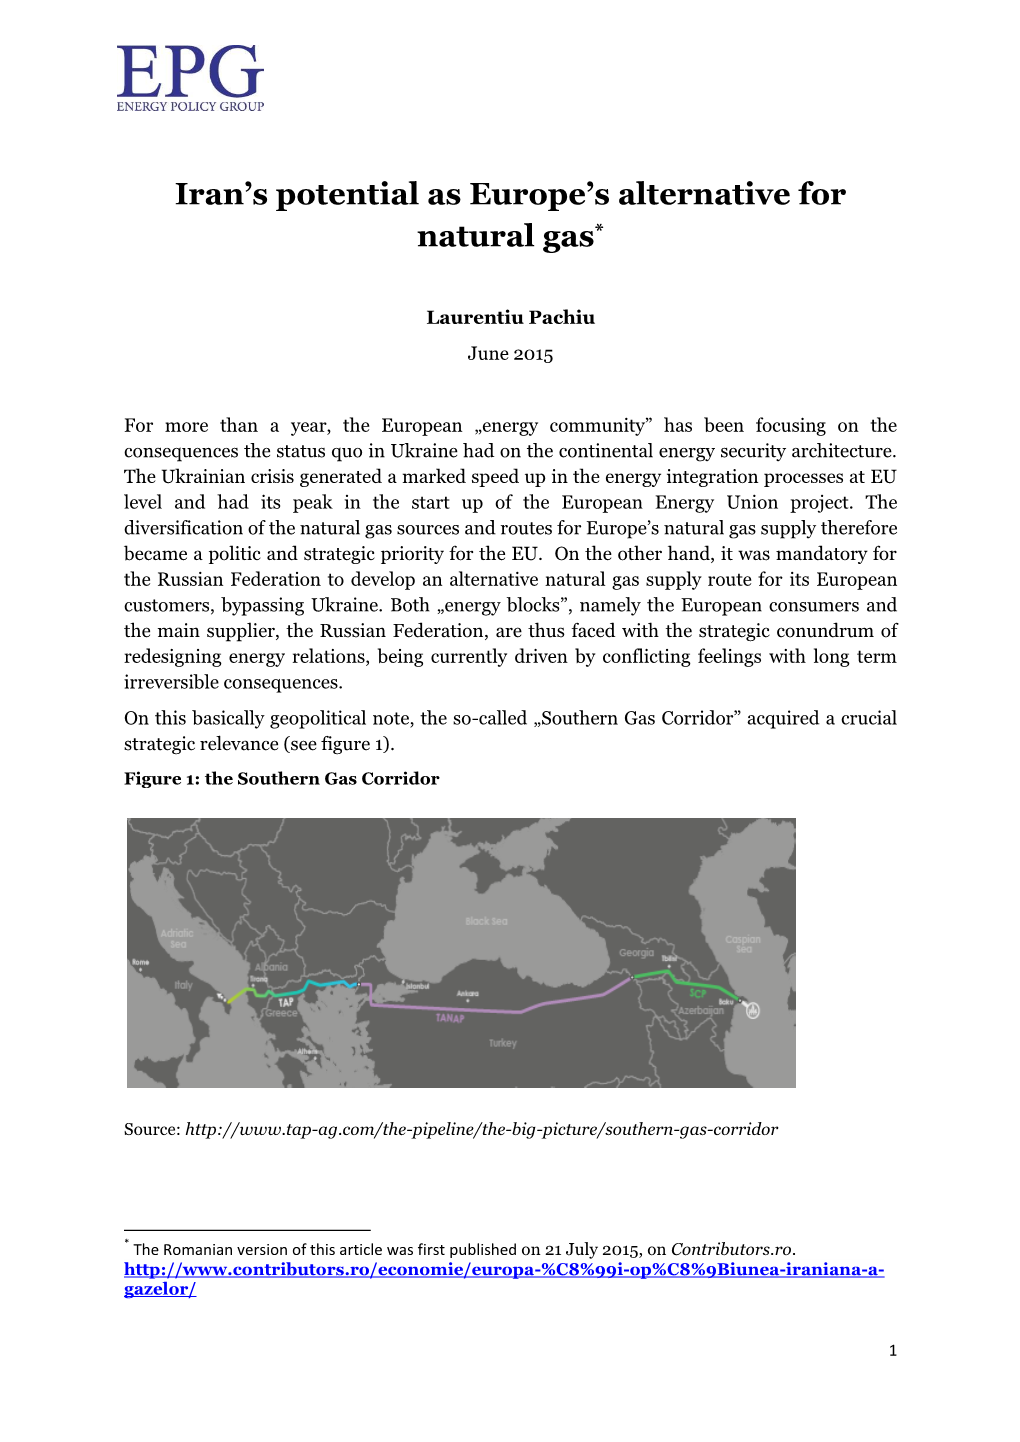 Iran's Potential As Europe's Alternative for Natural Gas*